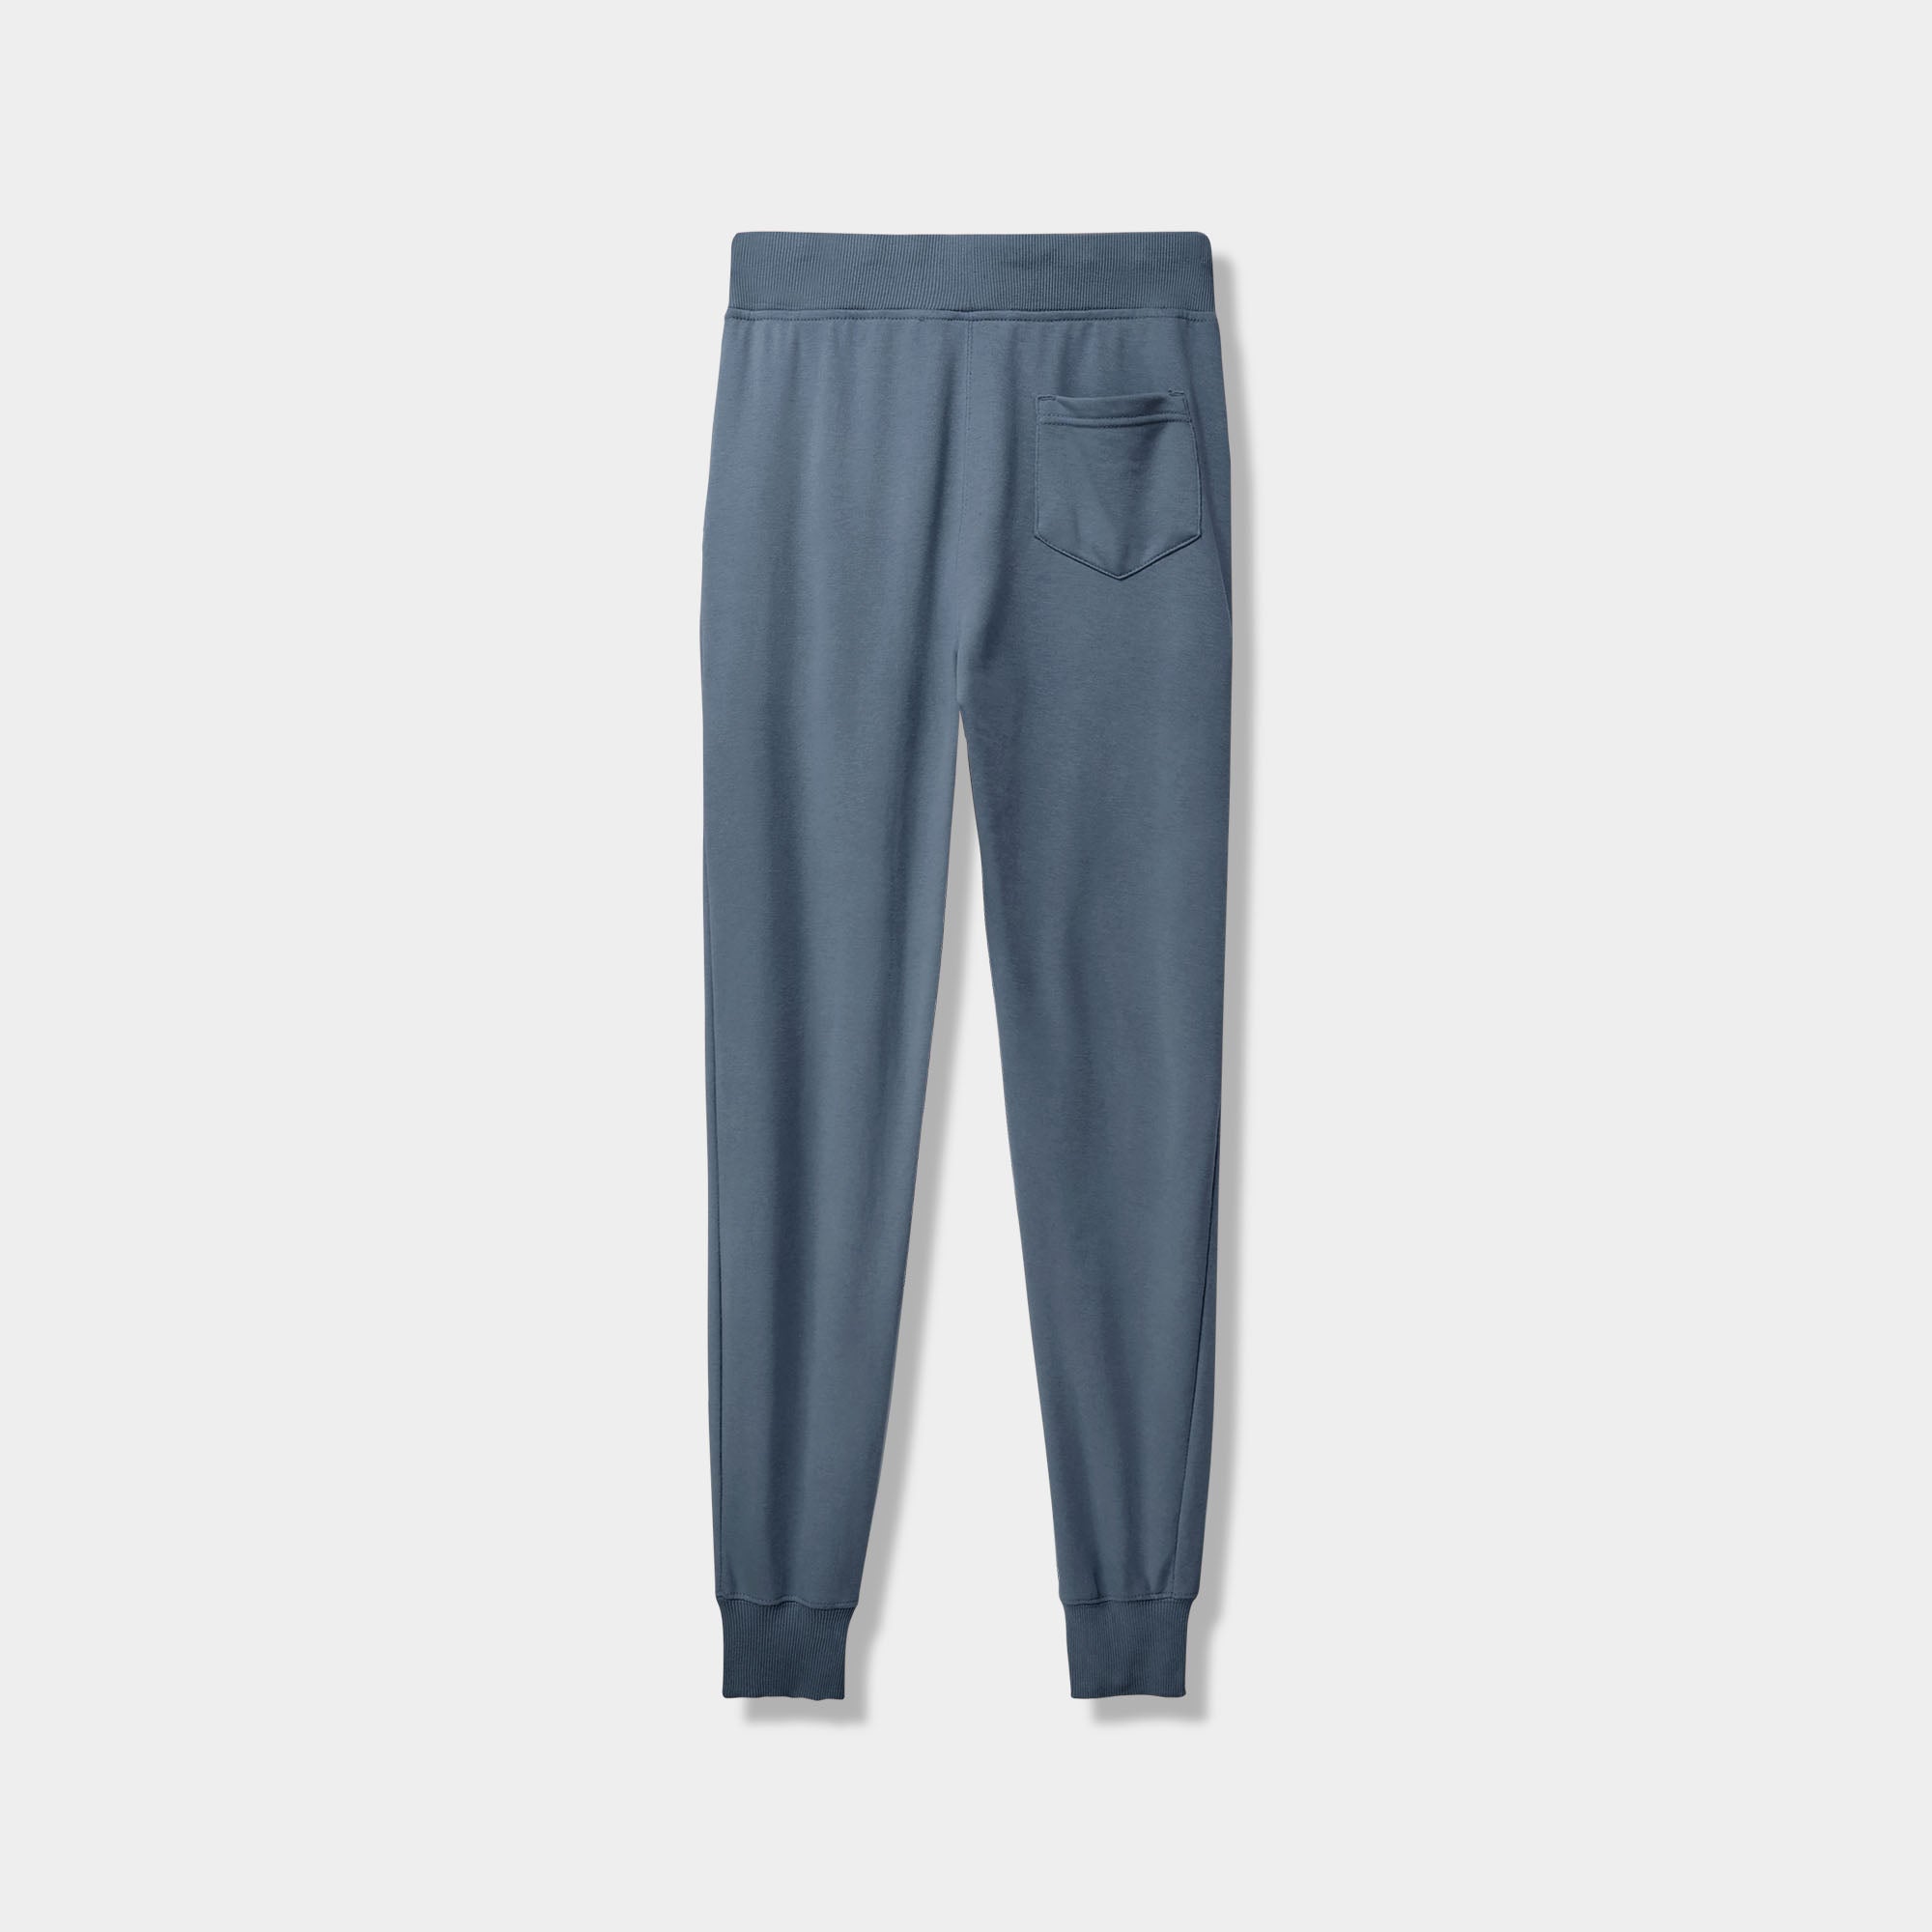 Women Uniqlo DRY-EX Ultra Stretch Active Ankle Pants, Women's